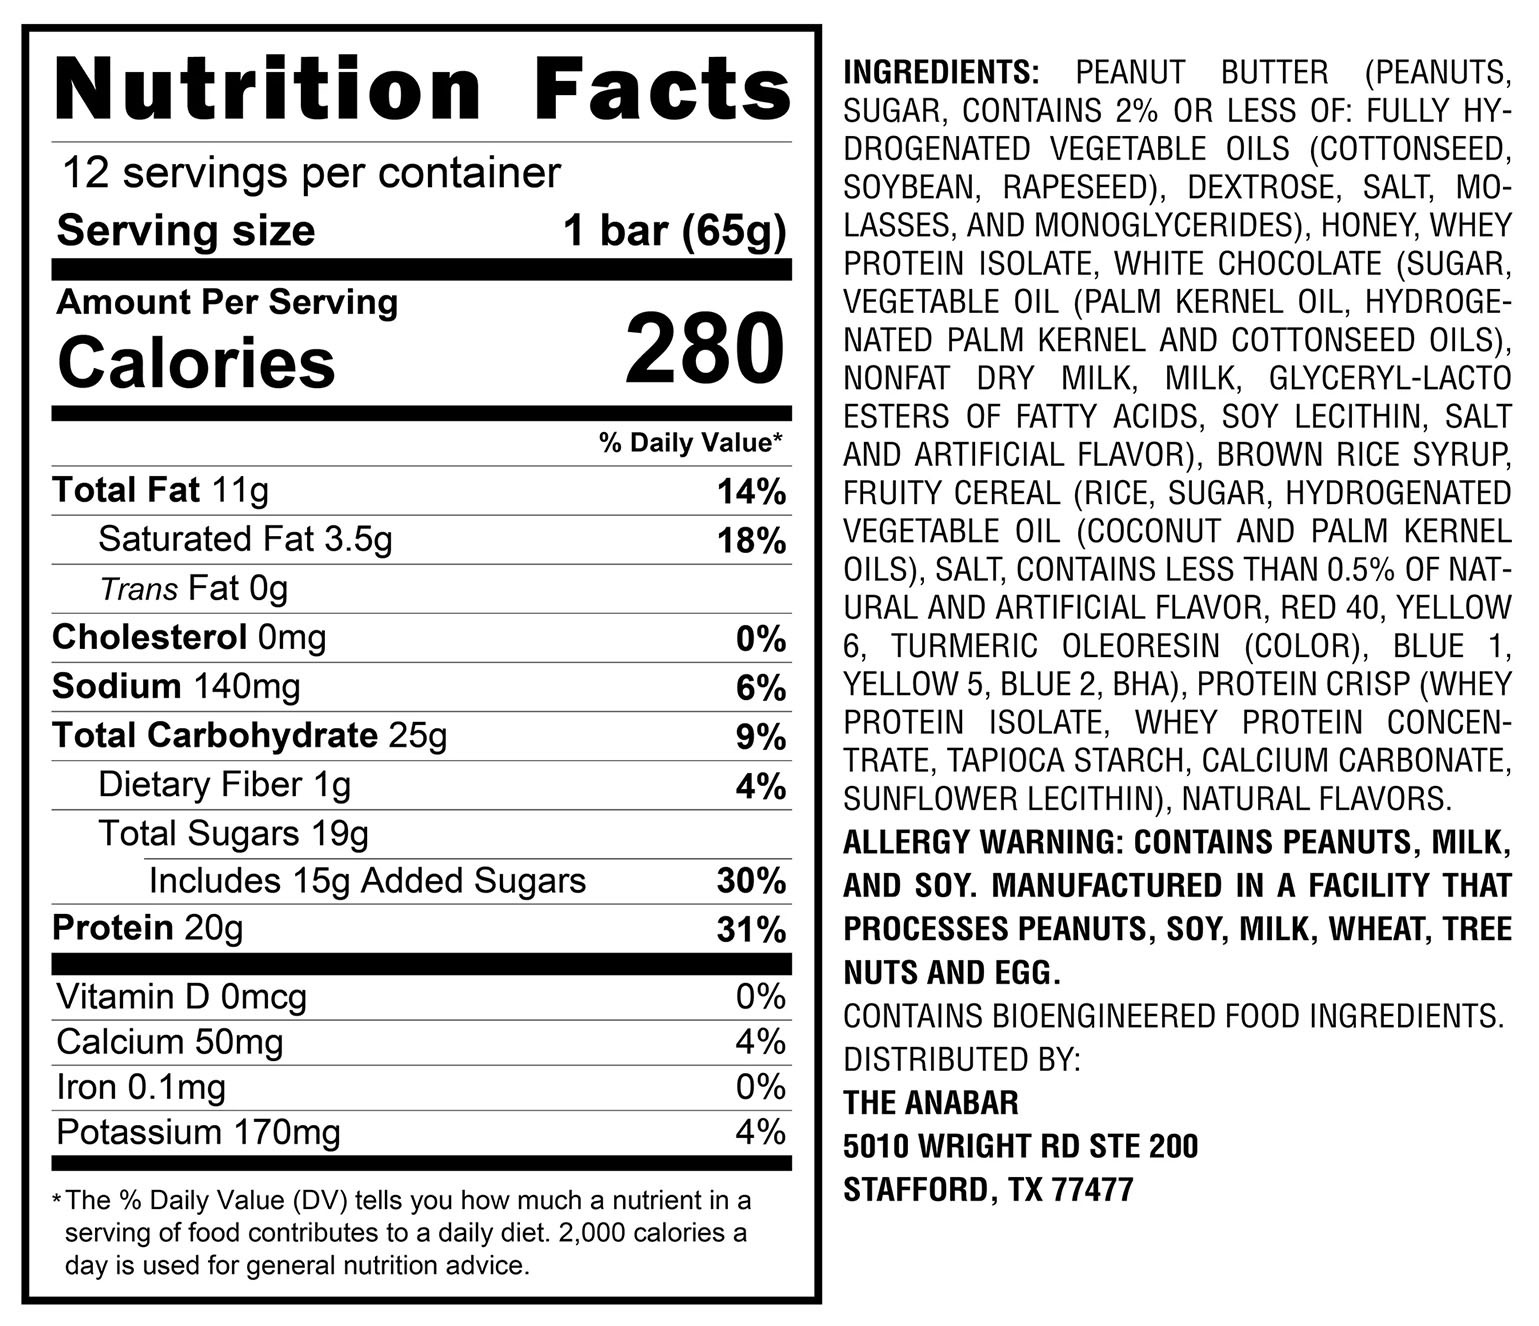 Anabar - Fruity Cereal Crunch - Nutrition Facts